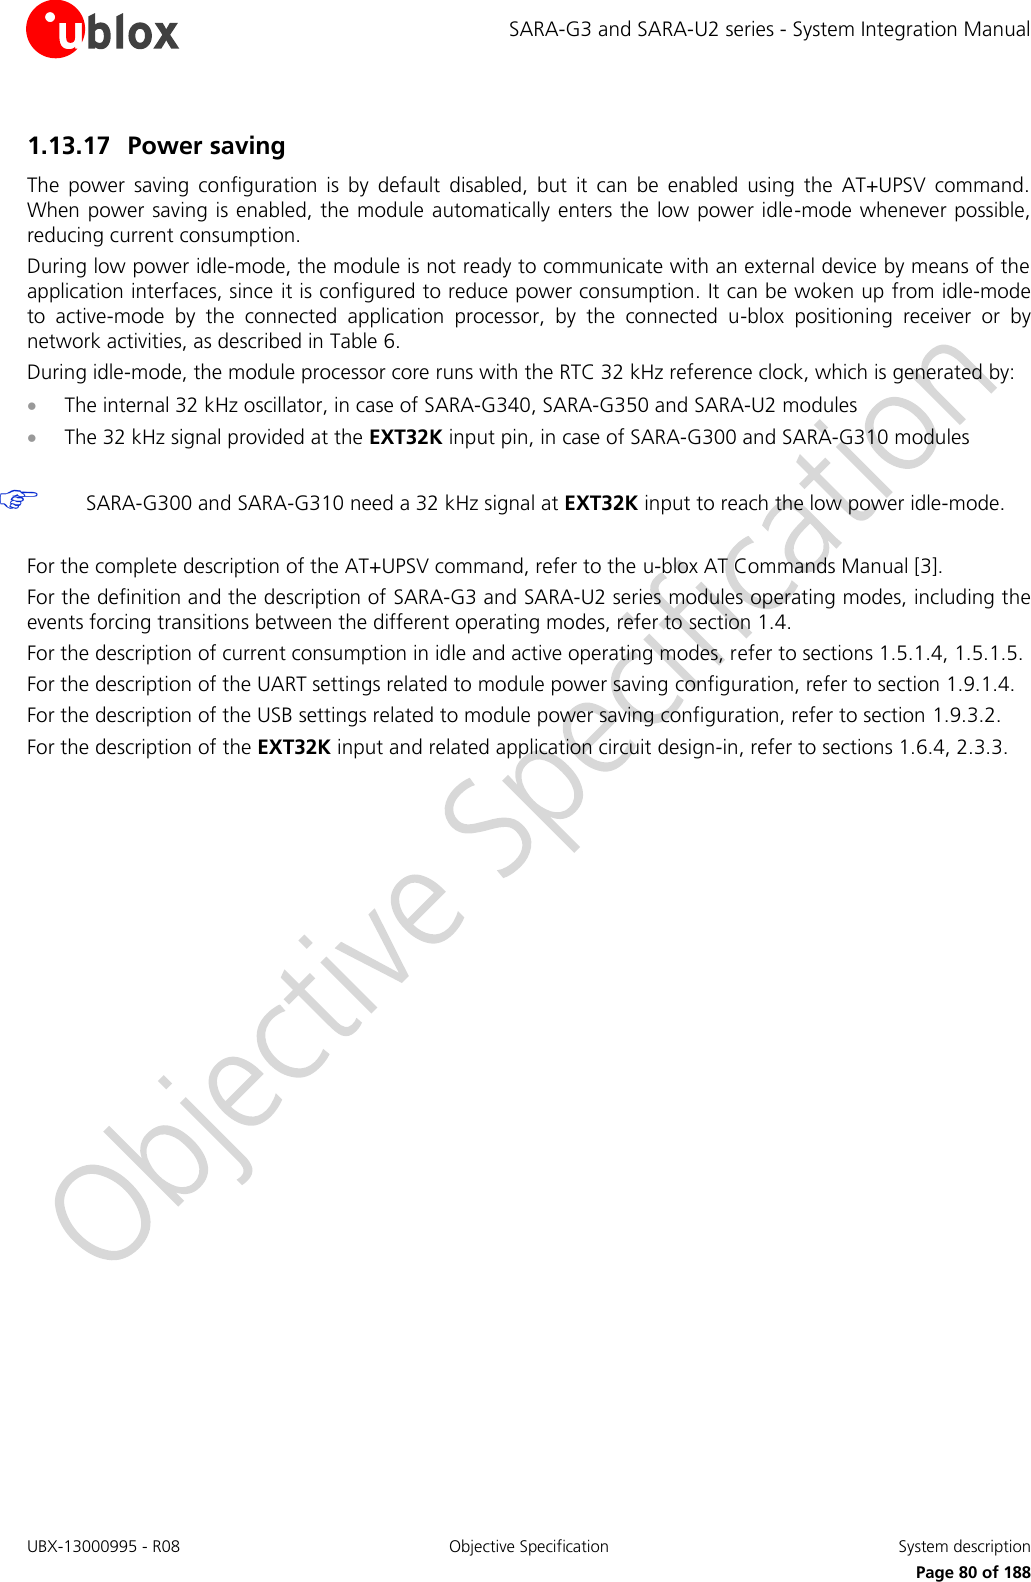 SARA-G3 and SARA-U2 series - System Integration Manual UBX-13000995 - R08  Objective Specification  System description     Page 80 of 188 1.13.17 Power saving  The  power  saving  configuration  is  by  default  disabled,  but  it  can  be  enabled  using  the  AT+UPSV  command. When power saving is enabled, the module automatically enters the low power idle-mode whenever possible, reducing current consumption. During low power idle-mode, the module is not ready to communicate with an external device by means of the application interfaces, since it is configured to reduce power consumption. It can be woken up from idle-mode to  active-mode  by  the  connected  application  processor,  by  the  connected  u-blox  positioning  receiver  or  by network activities, as described in Table 6. During idle-mode, the module processor core runs with the RTC 32 kHz reference clock, which is generated by:  The internal 32 kHz oscillator, in case of SARA-G340, SARA-G350 and SARA-U2 modules  The 32 kHz signal provided at the EXT32K input pin, in case of SARA-G300 and SARA-G310 modules   SARA-G300 and SARA-G310 need a 32 kHz signal at EXT32K input to reach the low power idle-mode.  For the complete description of the AT+UPSV command, refer to the u-blox AT Commands Manual [3]. For the definition and the description of SARA-G3 and SARA-U2 series modules operating modes, including the events forcing transitions between the different operating modes, refer to section 1.4. For the description of current consumption in idle and active operating modes, refer to sections 1.5.1.4, 1.5.1.5. For the description of the UART settings related to module power saving configuration, refer to section 1.9.1.4. For the description of the USB settings related to module power saving configuration, refer to section 1.9.3.2. For the description of the EXT32K input and related application circuit design-in, refer to sections 1.6.4, 2.3.3.  